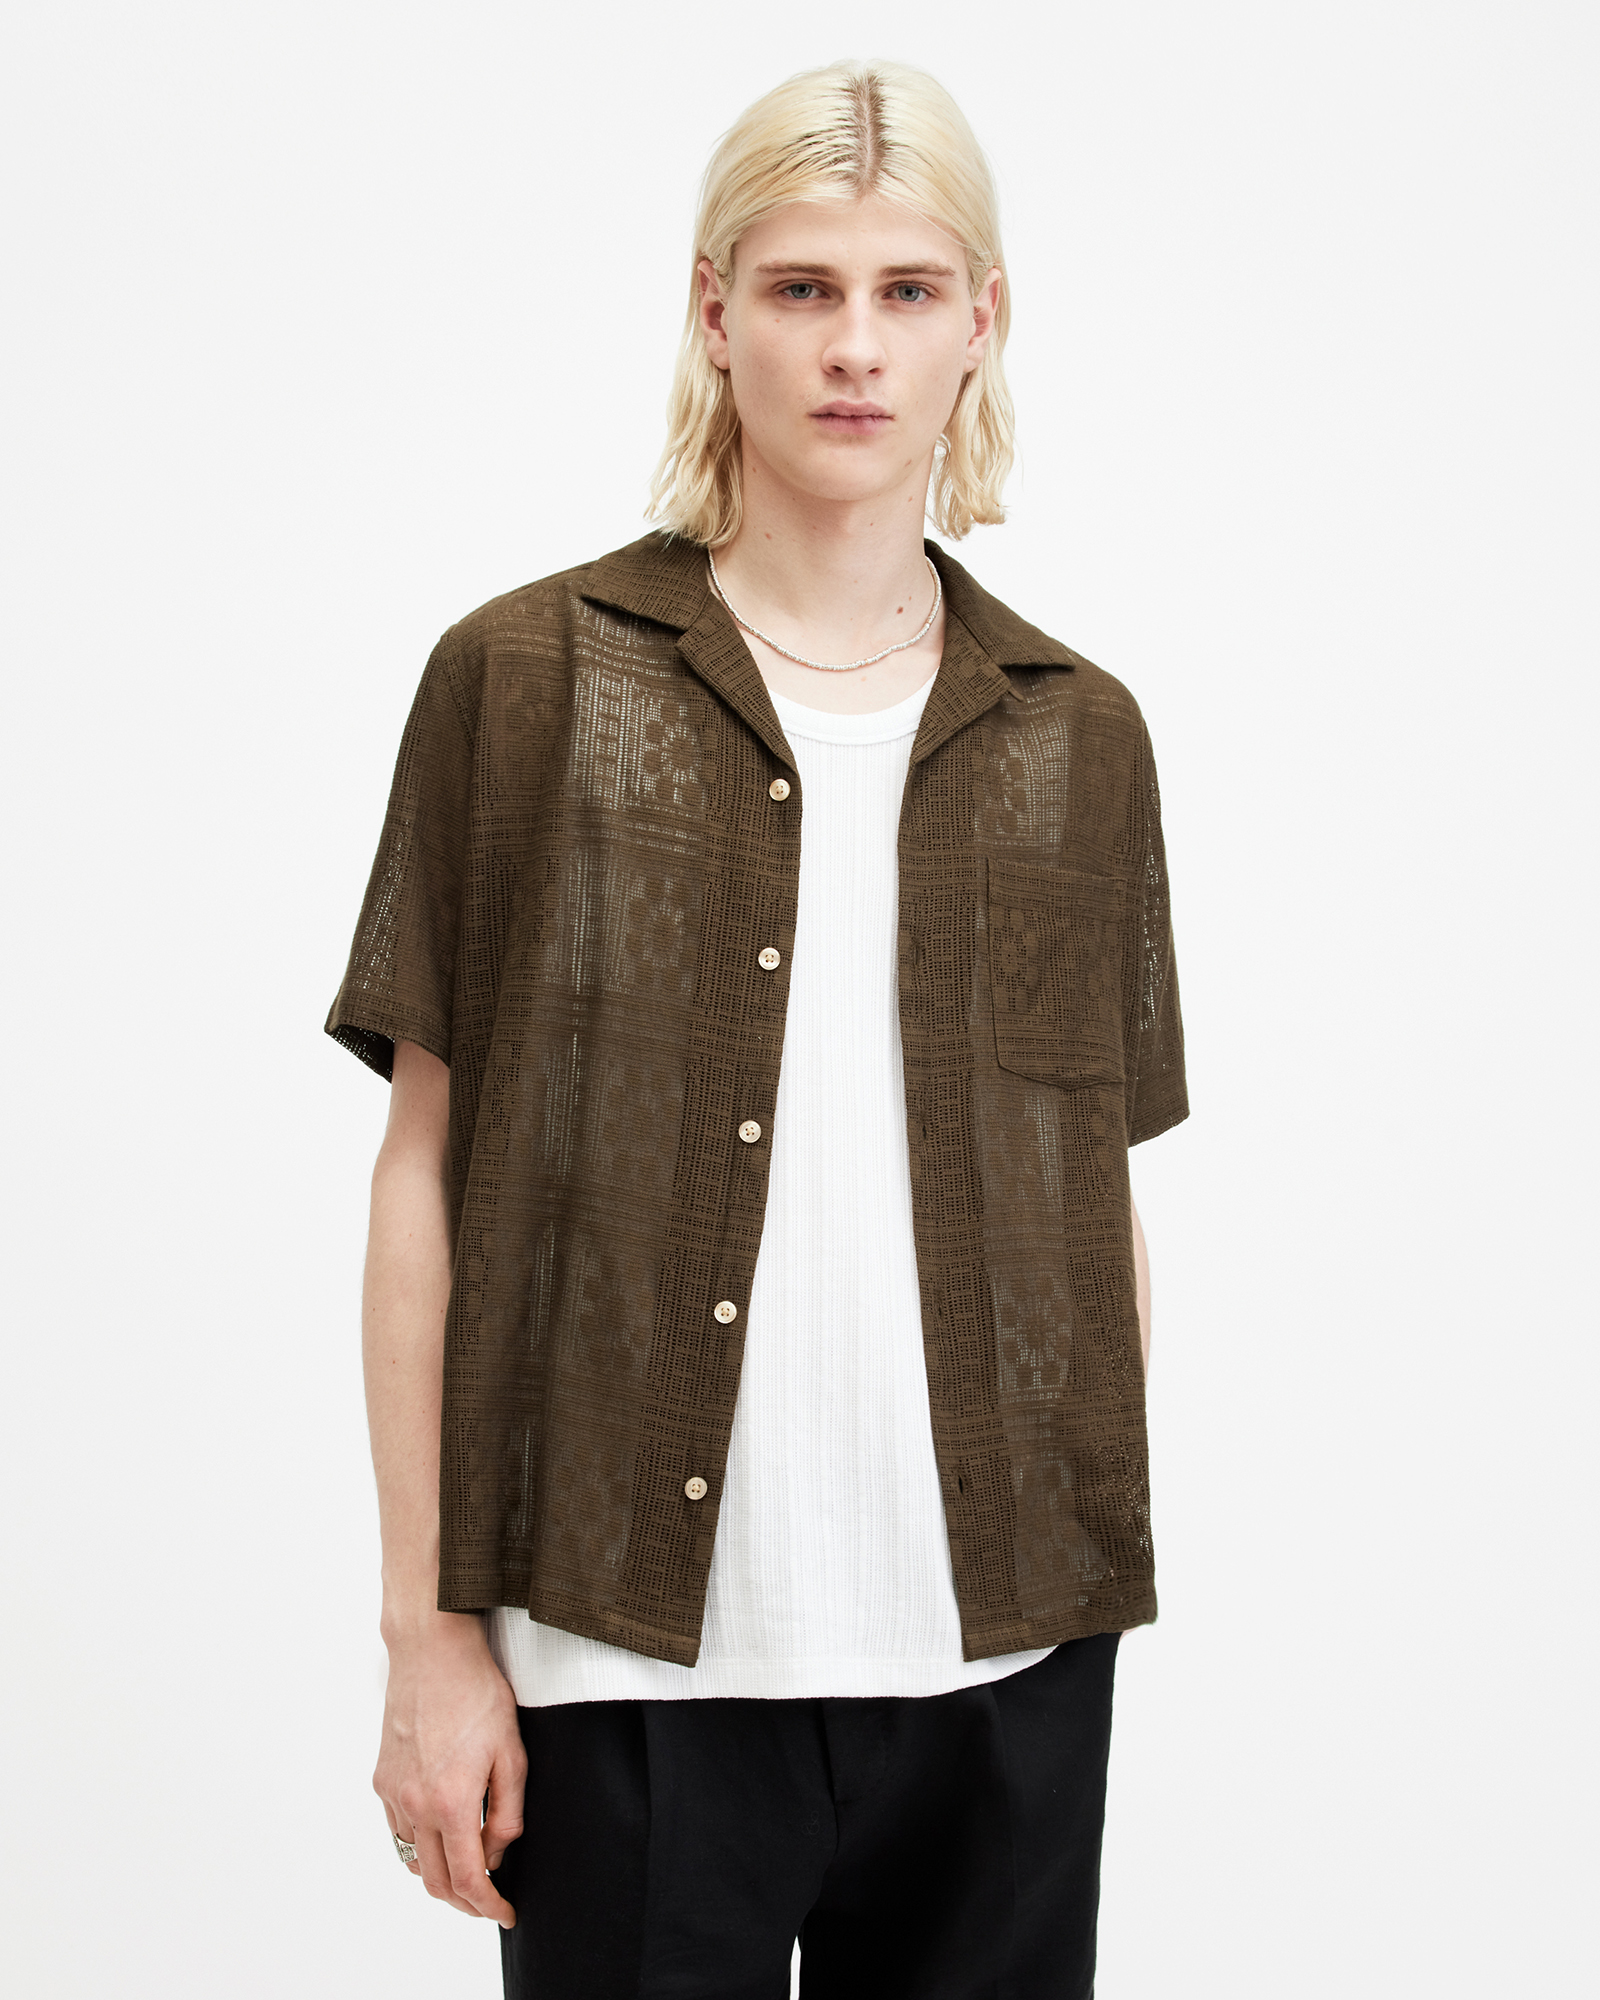 AllSaints Caleta Lace Relaxed Fit Shirt,, WOODLAND BROWN